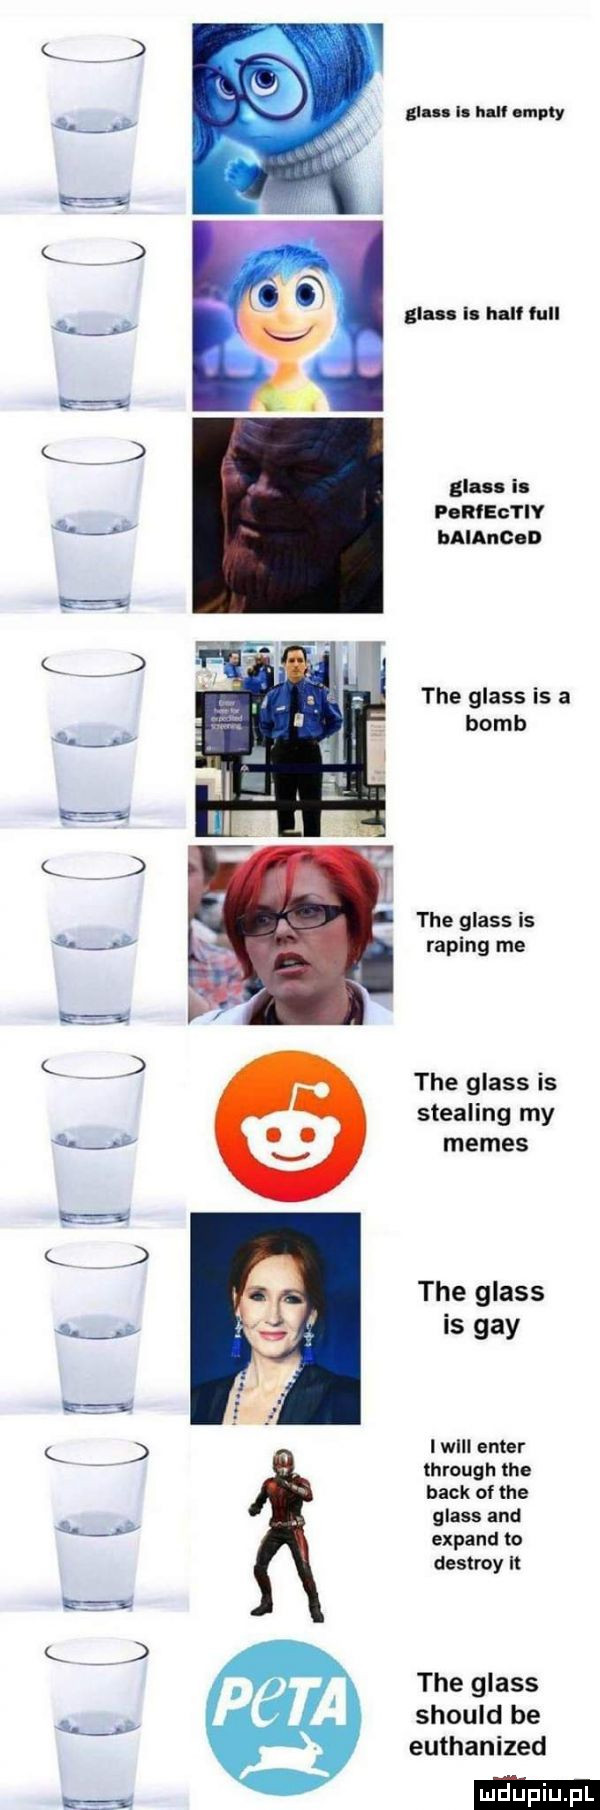 t  r. abakankami n u empty gau il hnﬂ lill gau il perfectiv baiancan tee glass is a bomb tee glass is racing me tee glass is sterling my memes tee glass is gay i will enter through tee beck of me glass and expand to destroy it tee glass should be euthanized